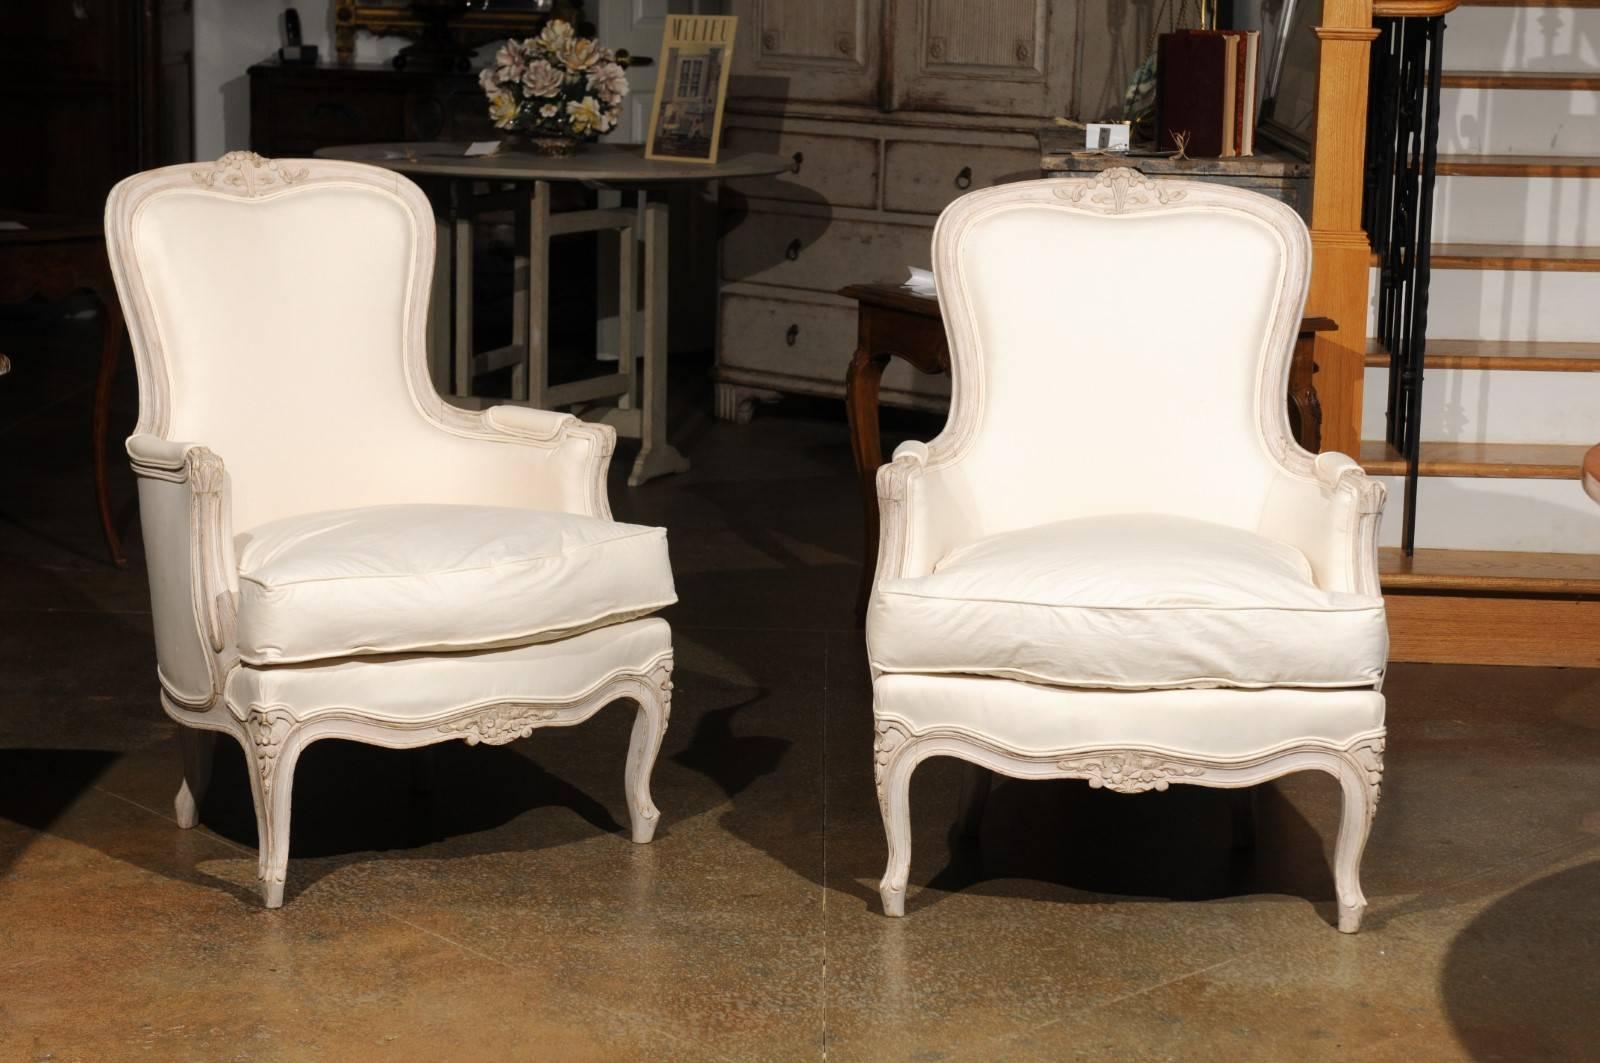 A pair of Swedish painted Rococo style bergères chairs from the late 19th century, with carved crests, scrolled arms, cabriole legs and upholstery. Each of this pair of Swedish bergères features a curved back, topped with a carved floral crest. This